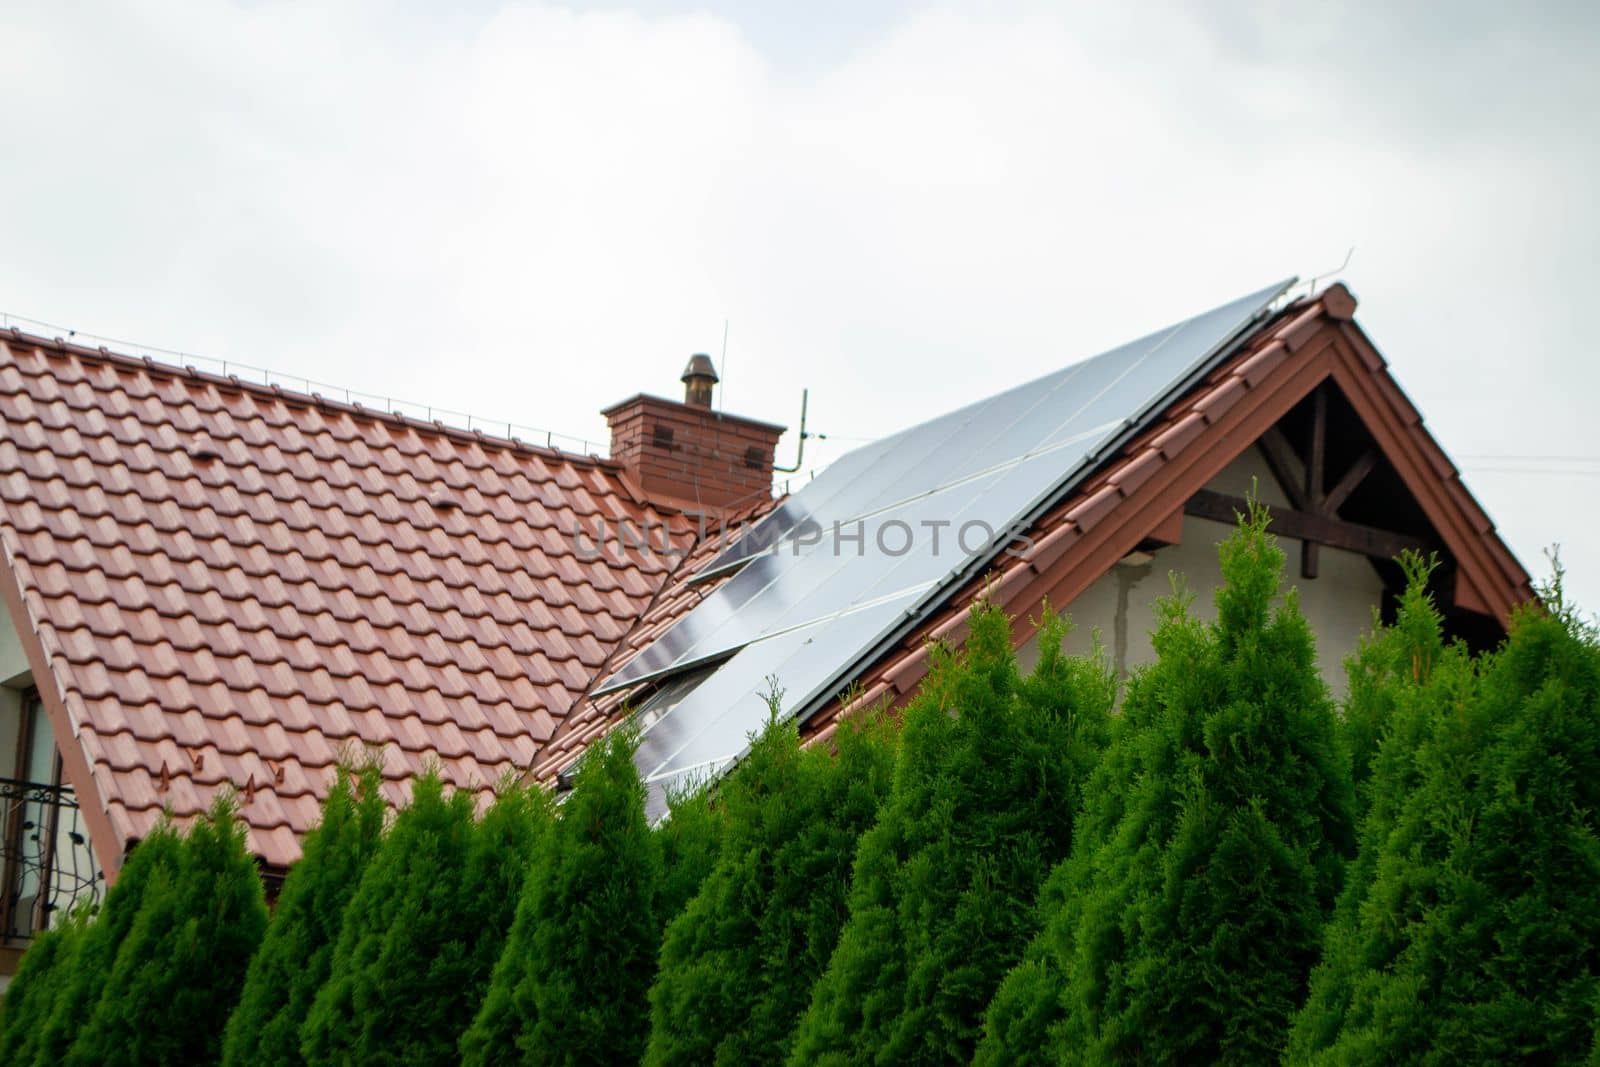 House roof with photovoltaic modules. Historic farm house with modern solar panels on roof and wall High quality photo